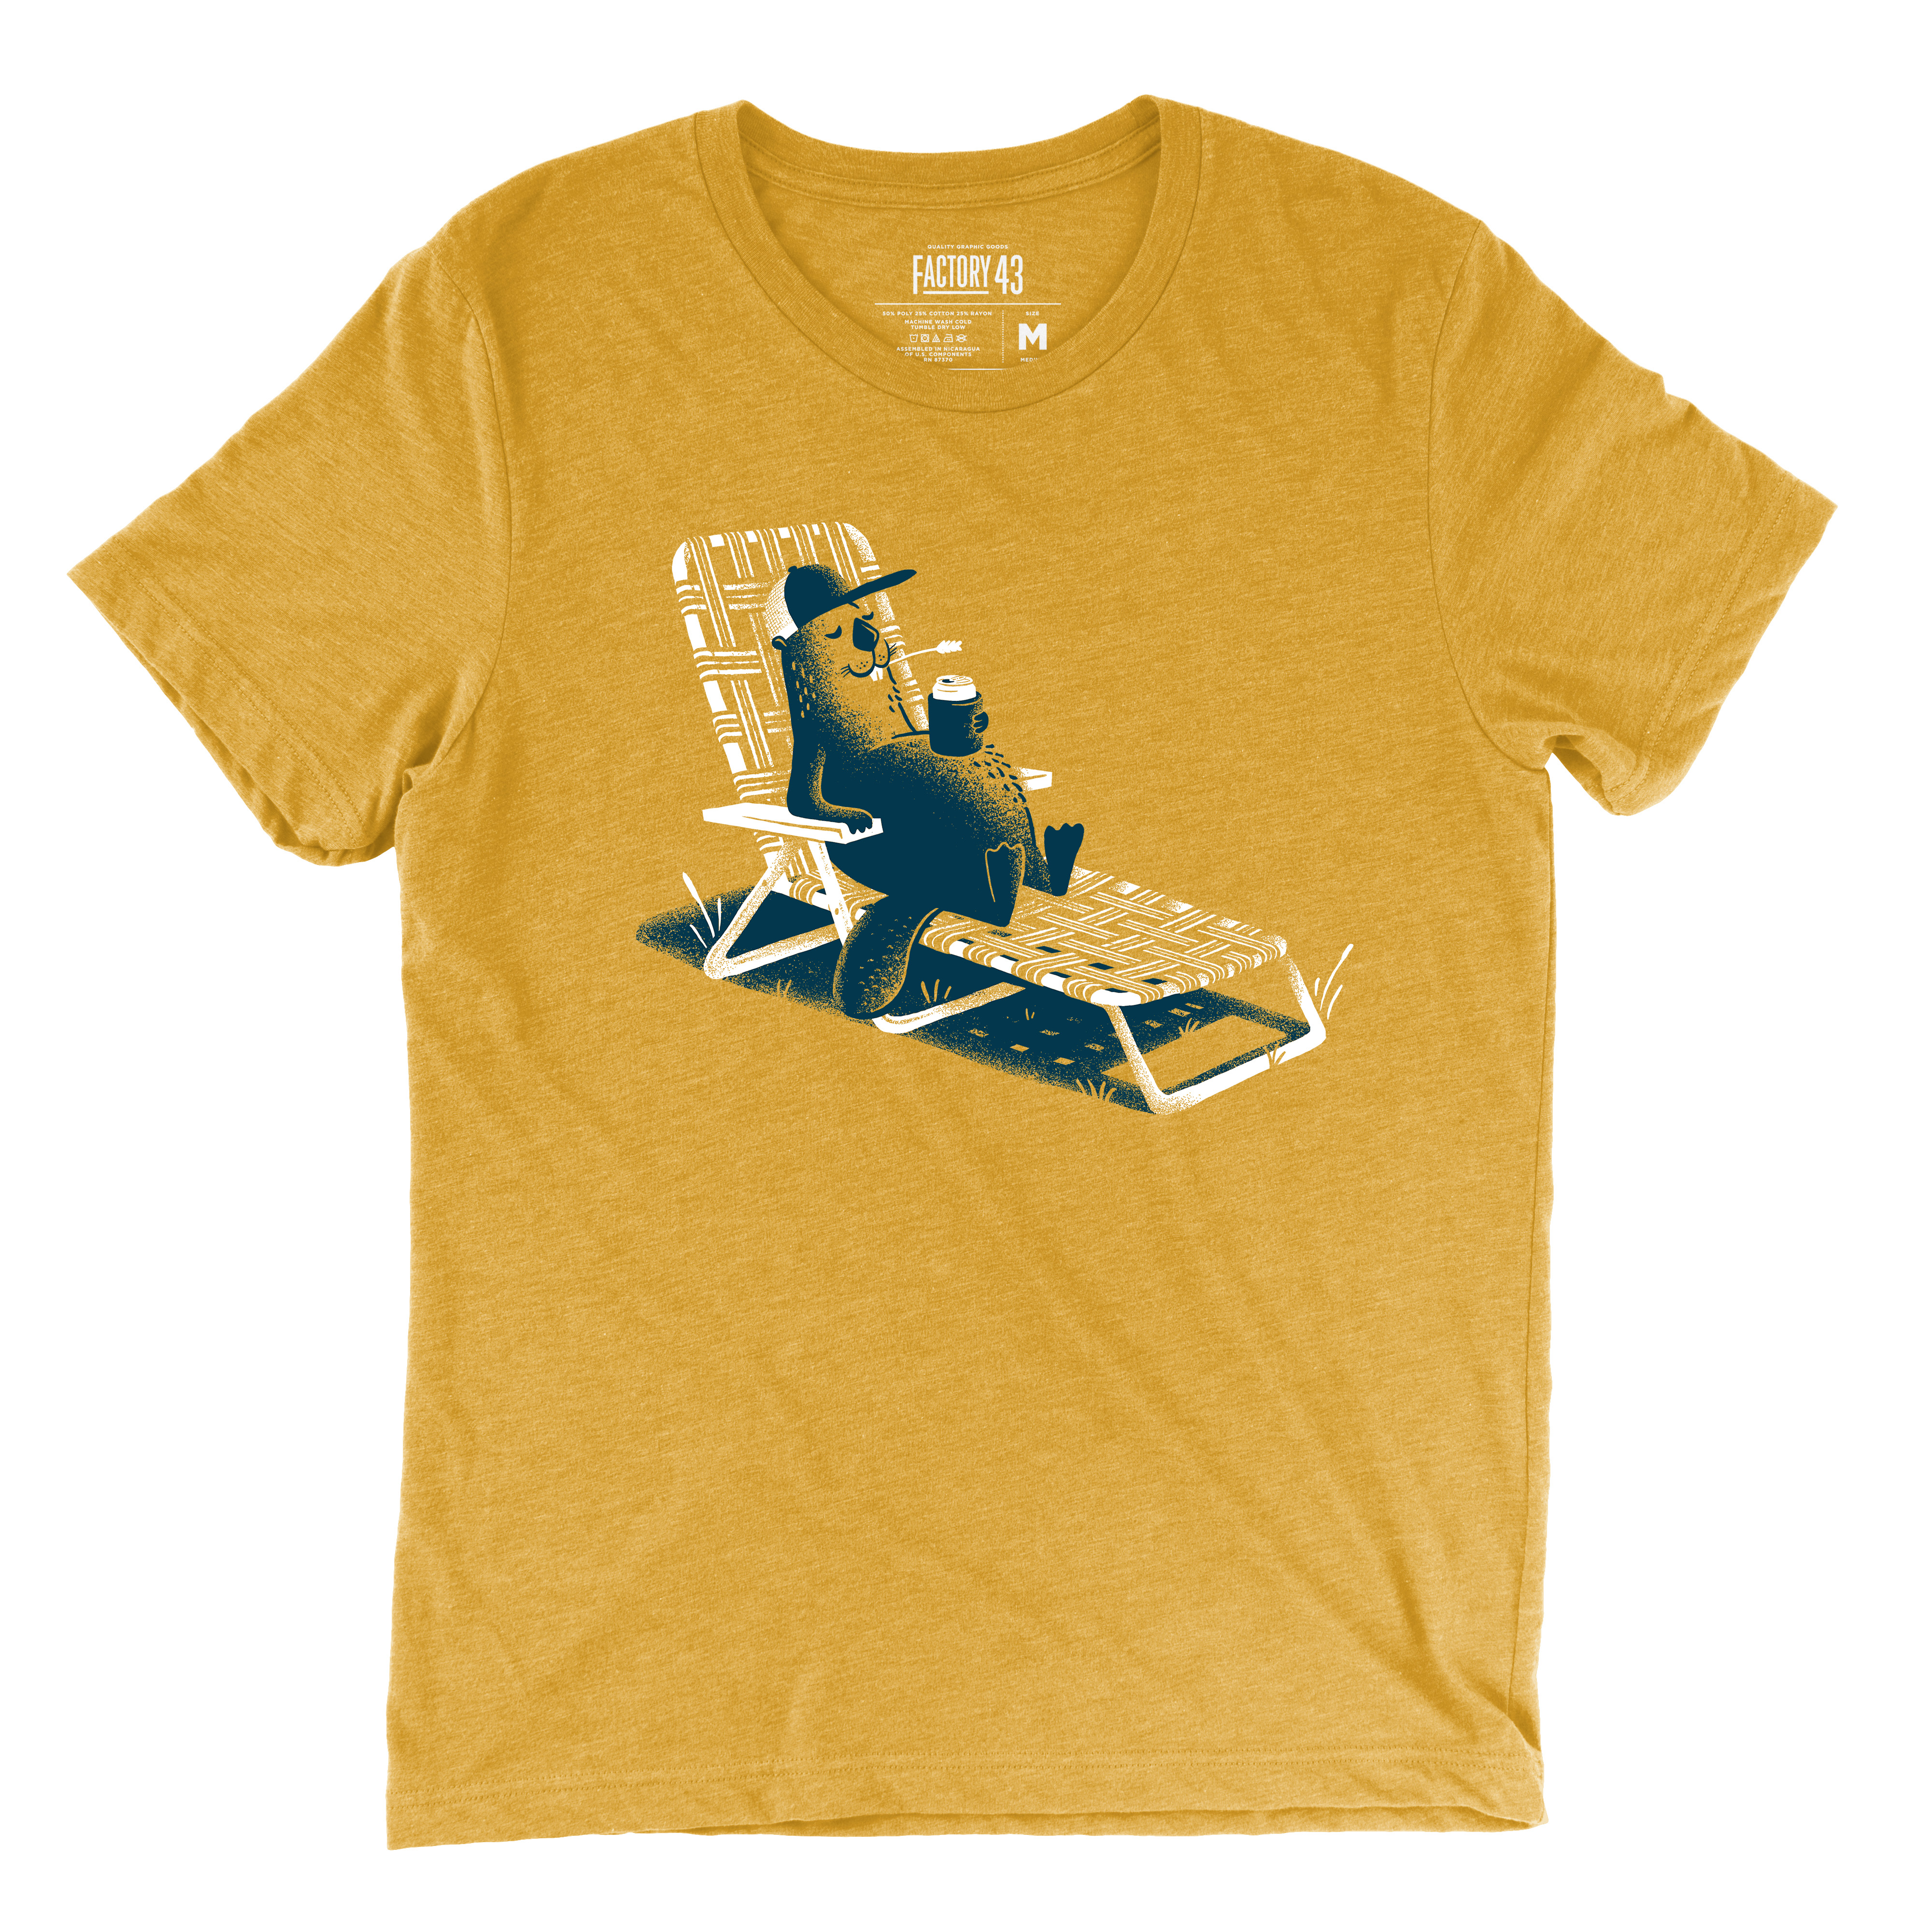 Mustard yellow tee of beaver in a lawnchair drinking a beer or soda. 